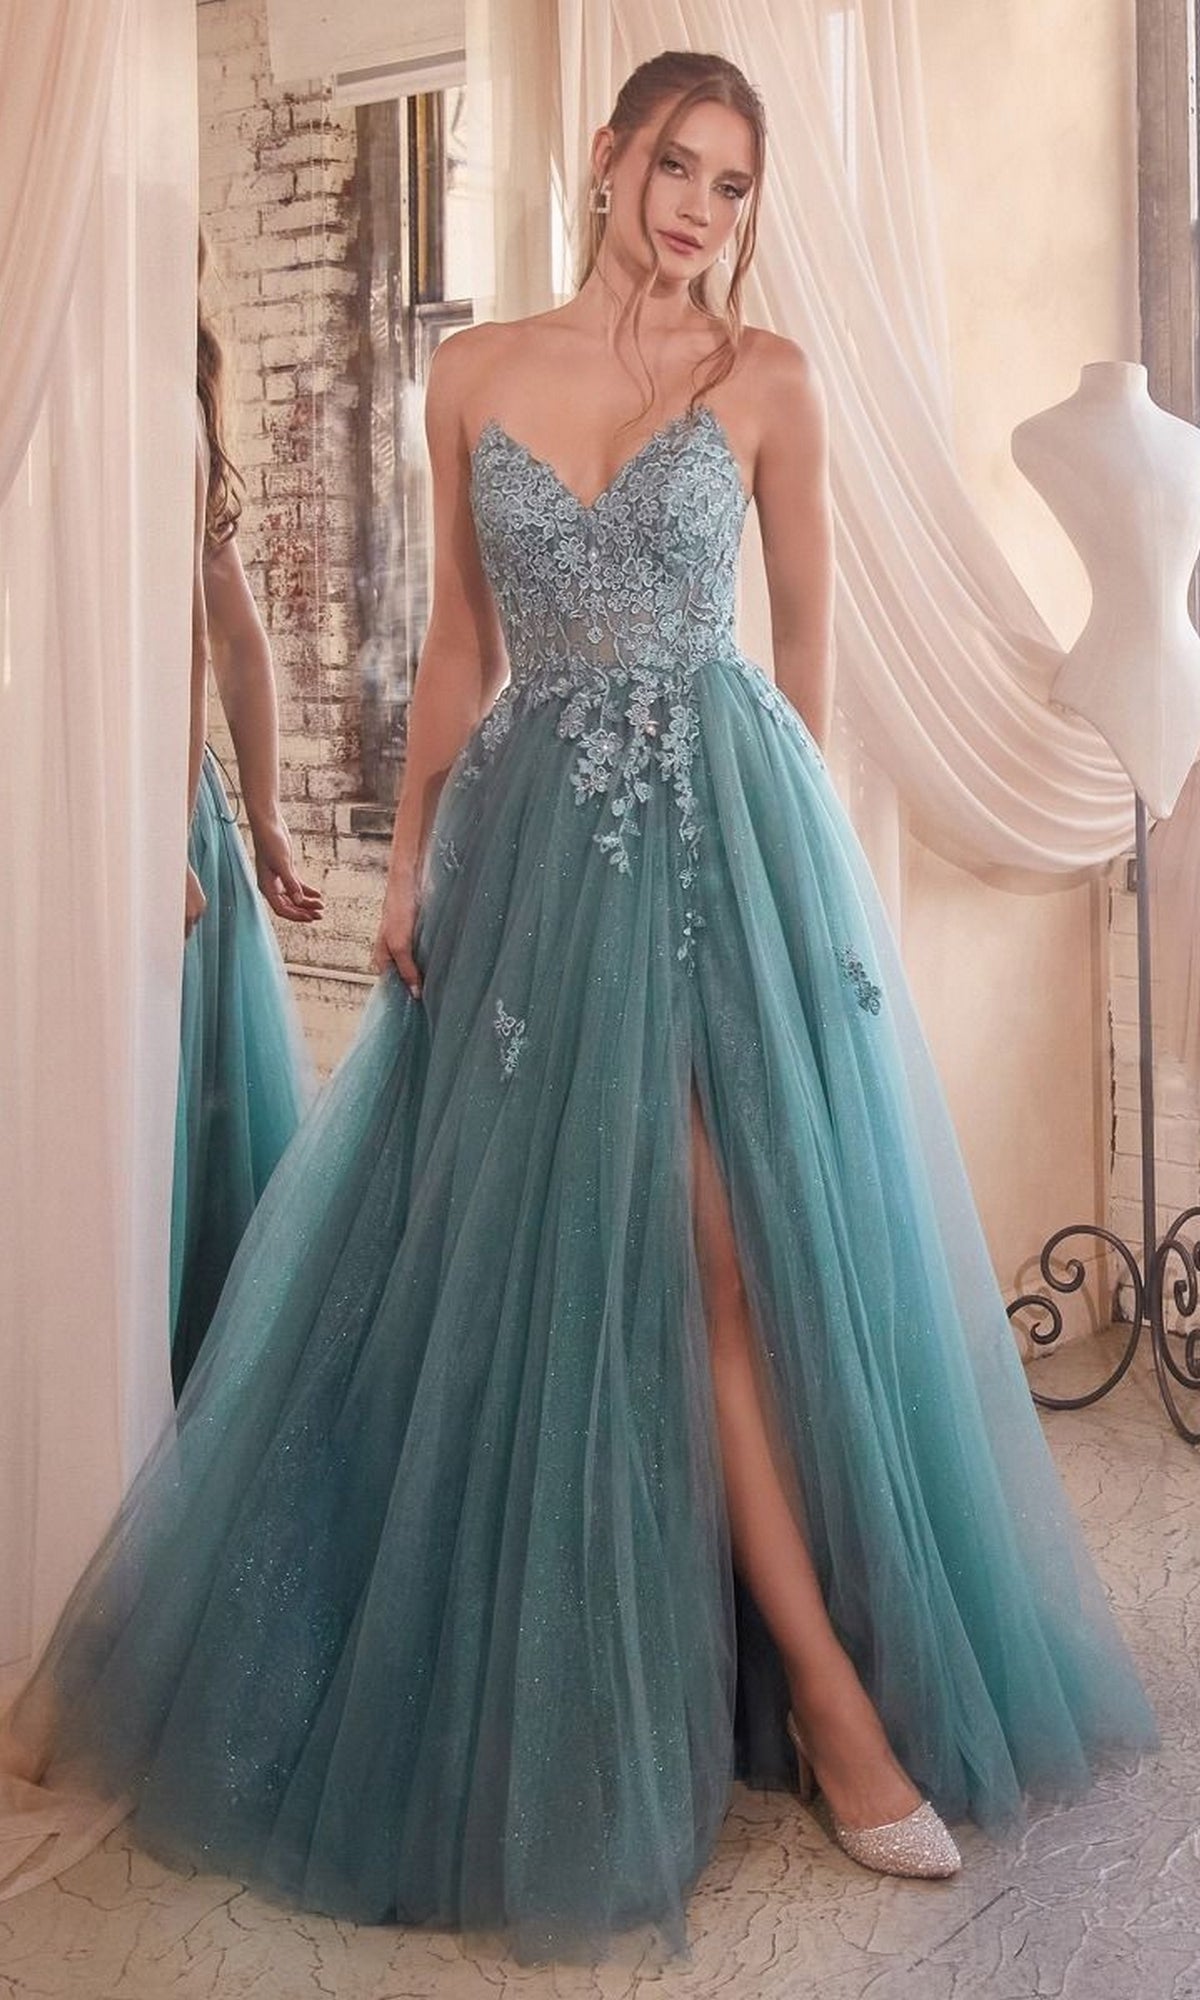 Dusty Teal Formal Long Dress C148 By Ladivine